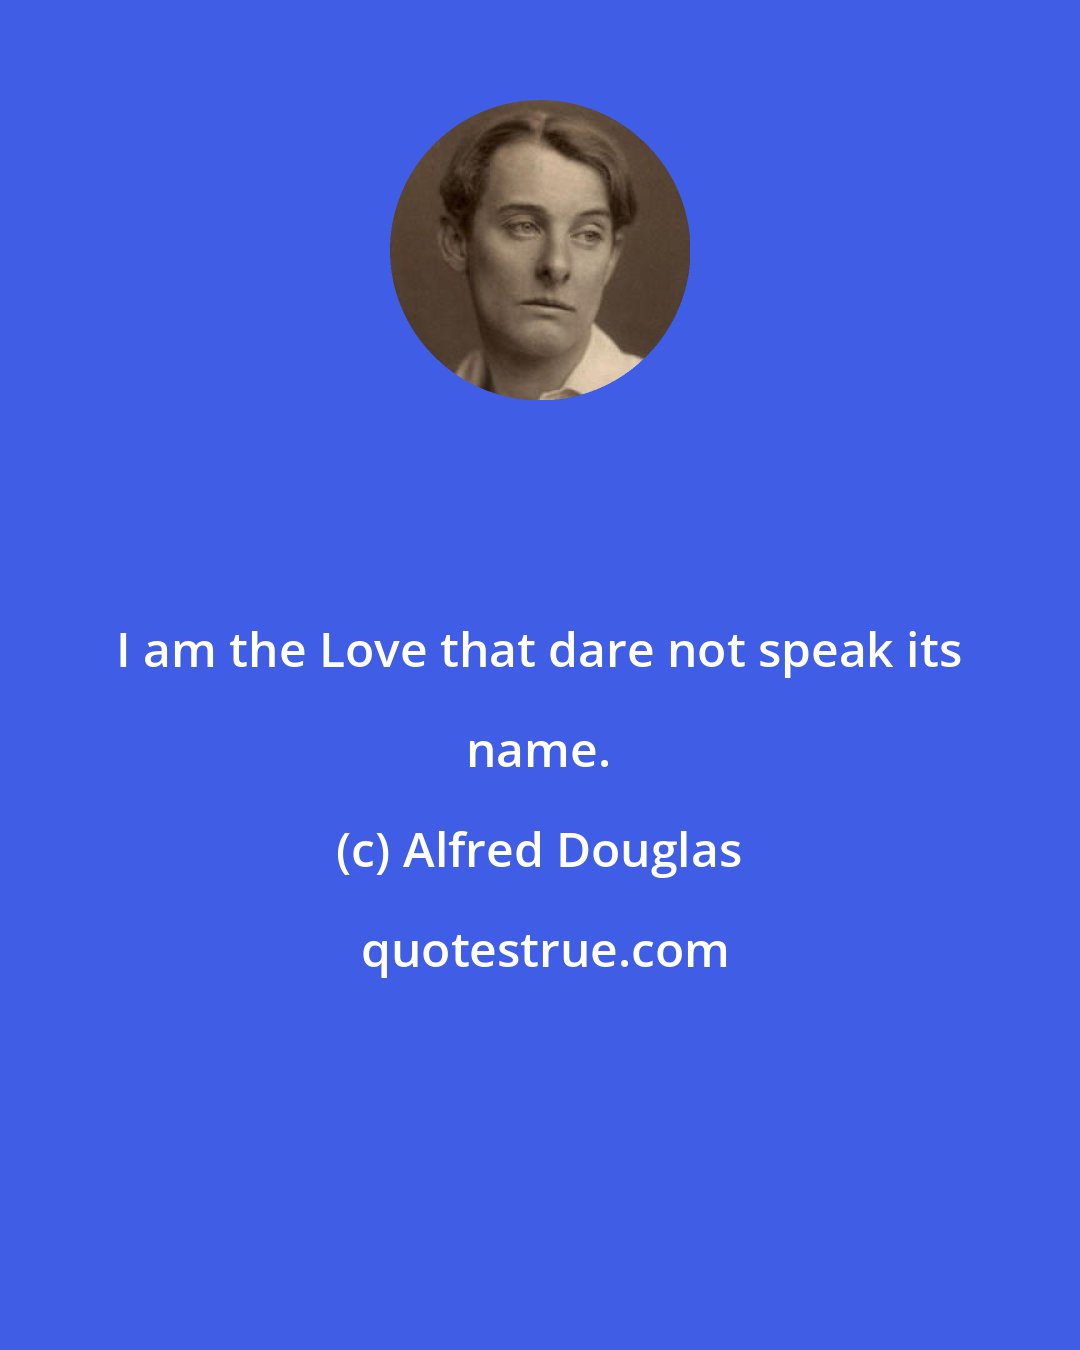 Alfred Douglas: I am the Love that dare not speak its name.